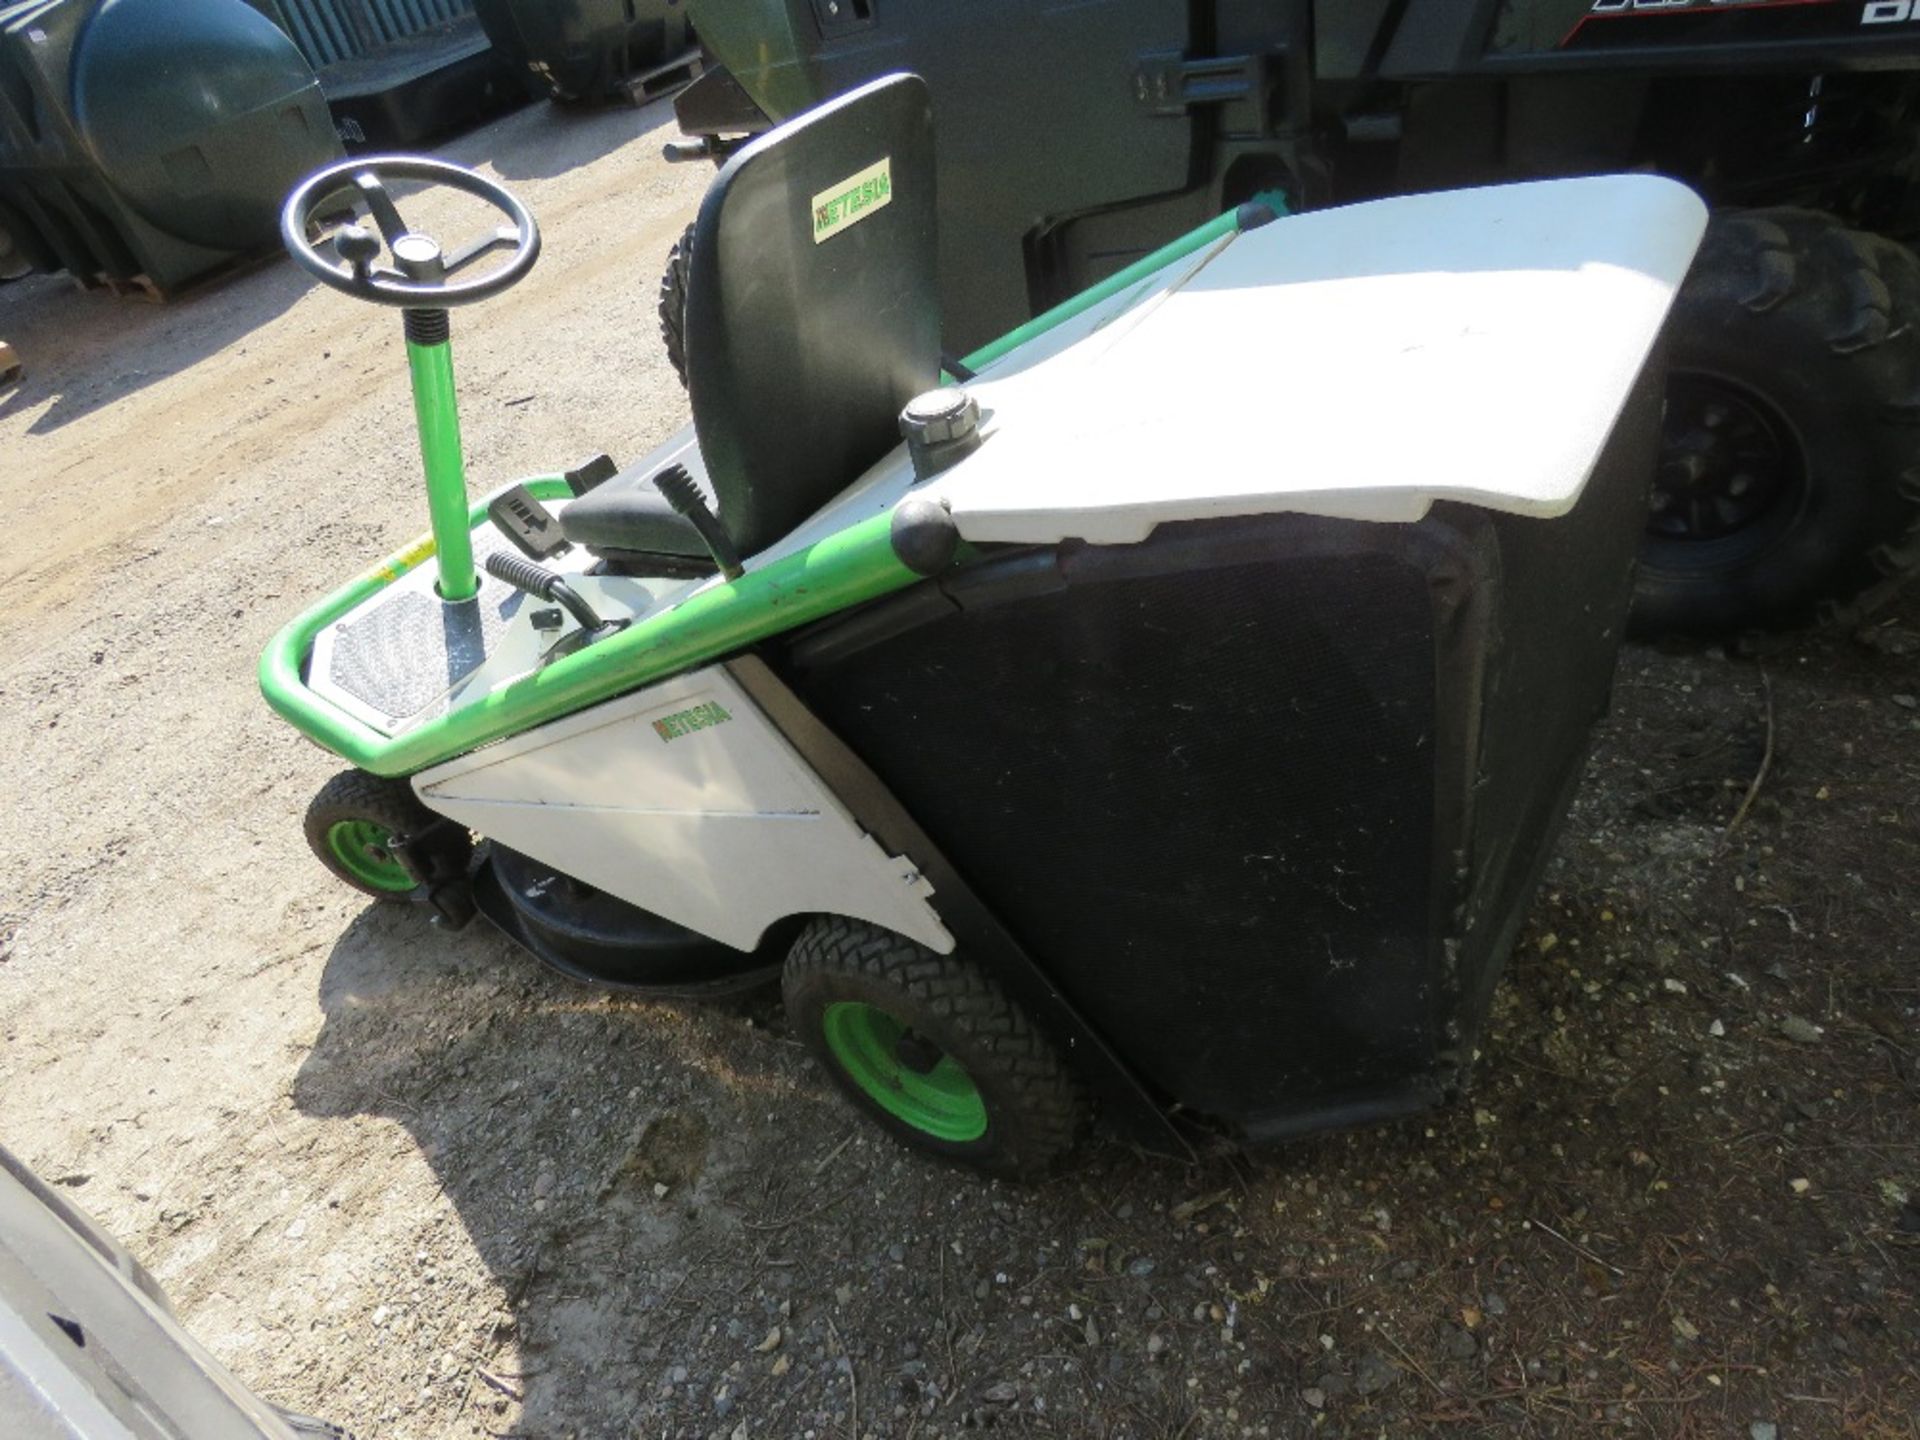 ETESIA PROFESSIONAL HYDRO RIDE ON MOWER WITH REAR COLLECTOR. WHEN TESTED WAS SEEN TO RUN AND DRIVE A - Image 4 of 9